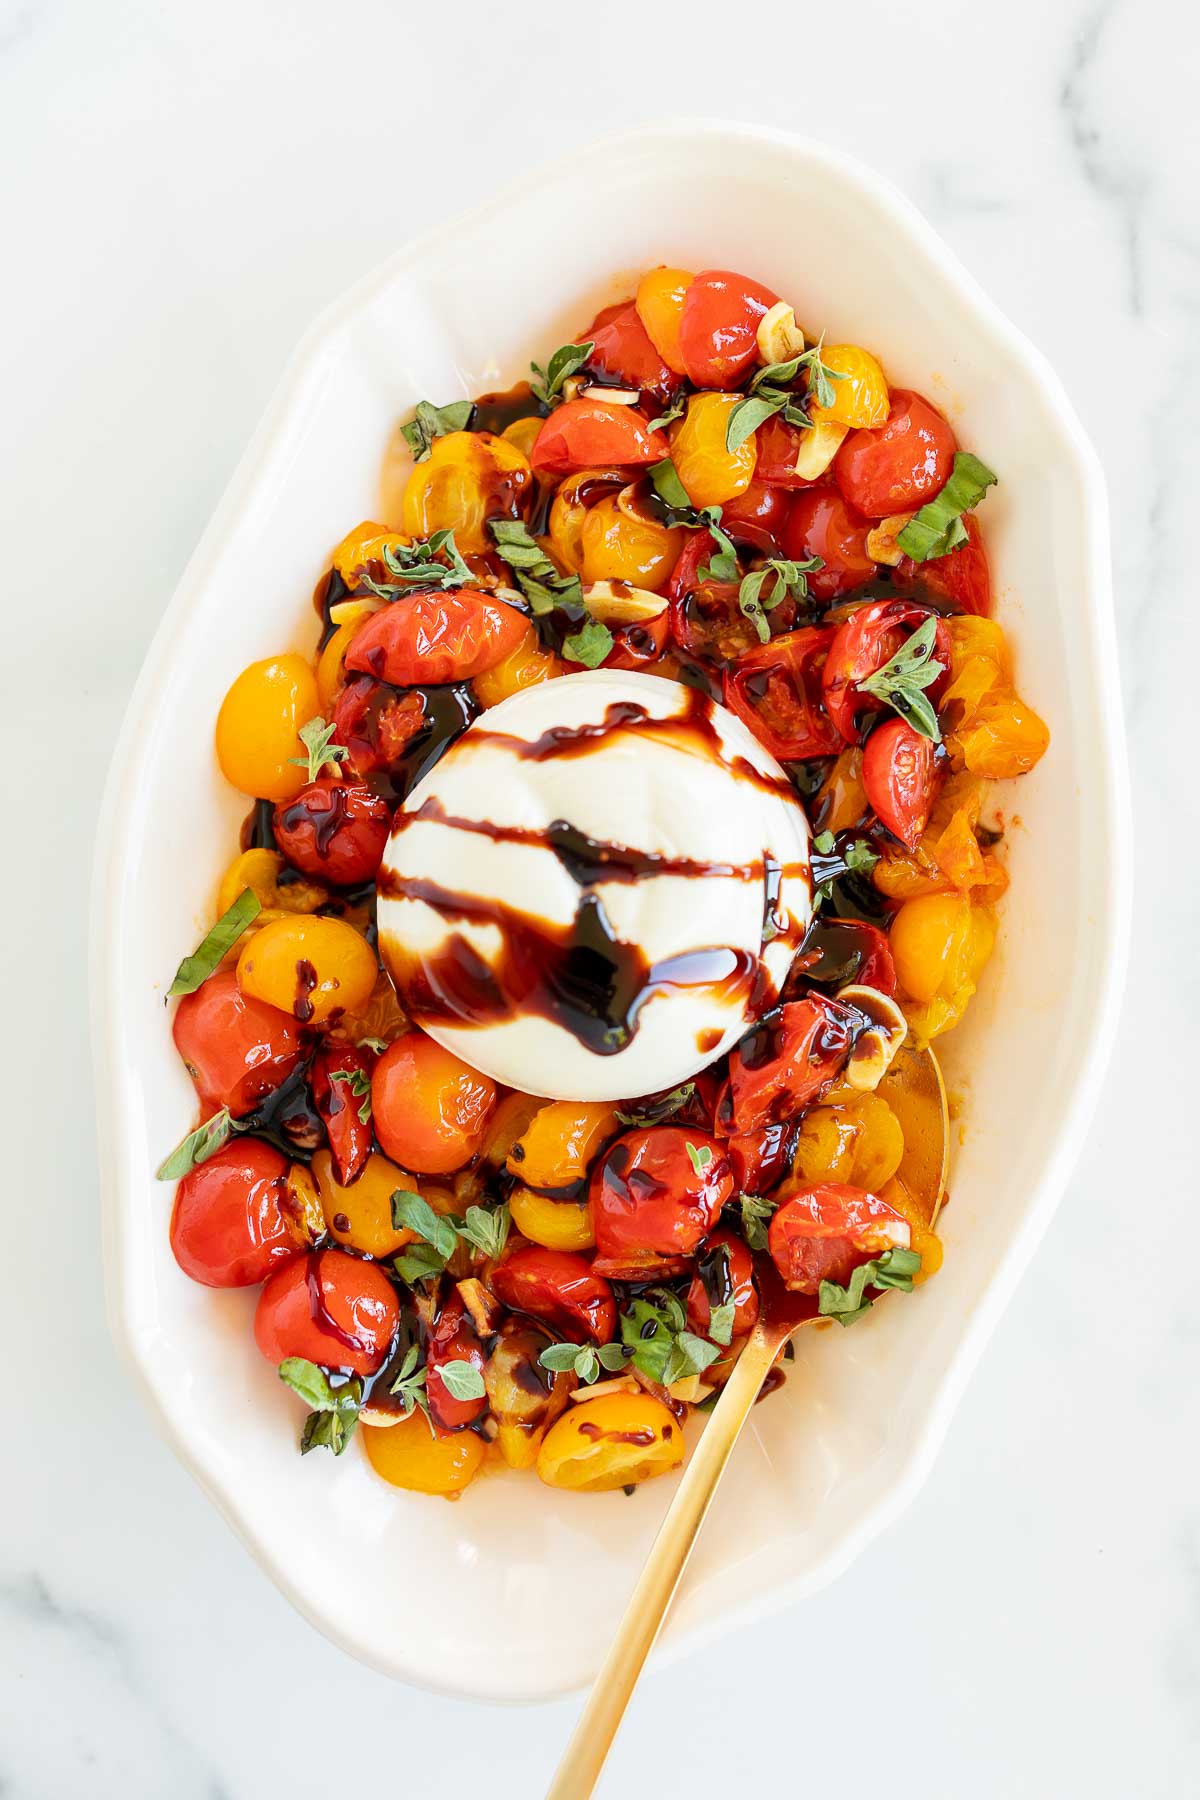 A white dish holds a colorful tomato salad topped with a ball of burrata cheese drizzled with balsamic glaze. Perfect for summer appetizers, the salad is garnished with chopped basil.